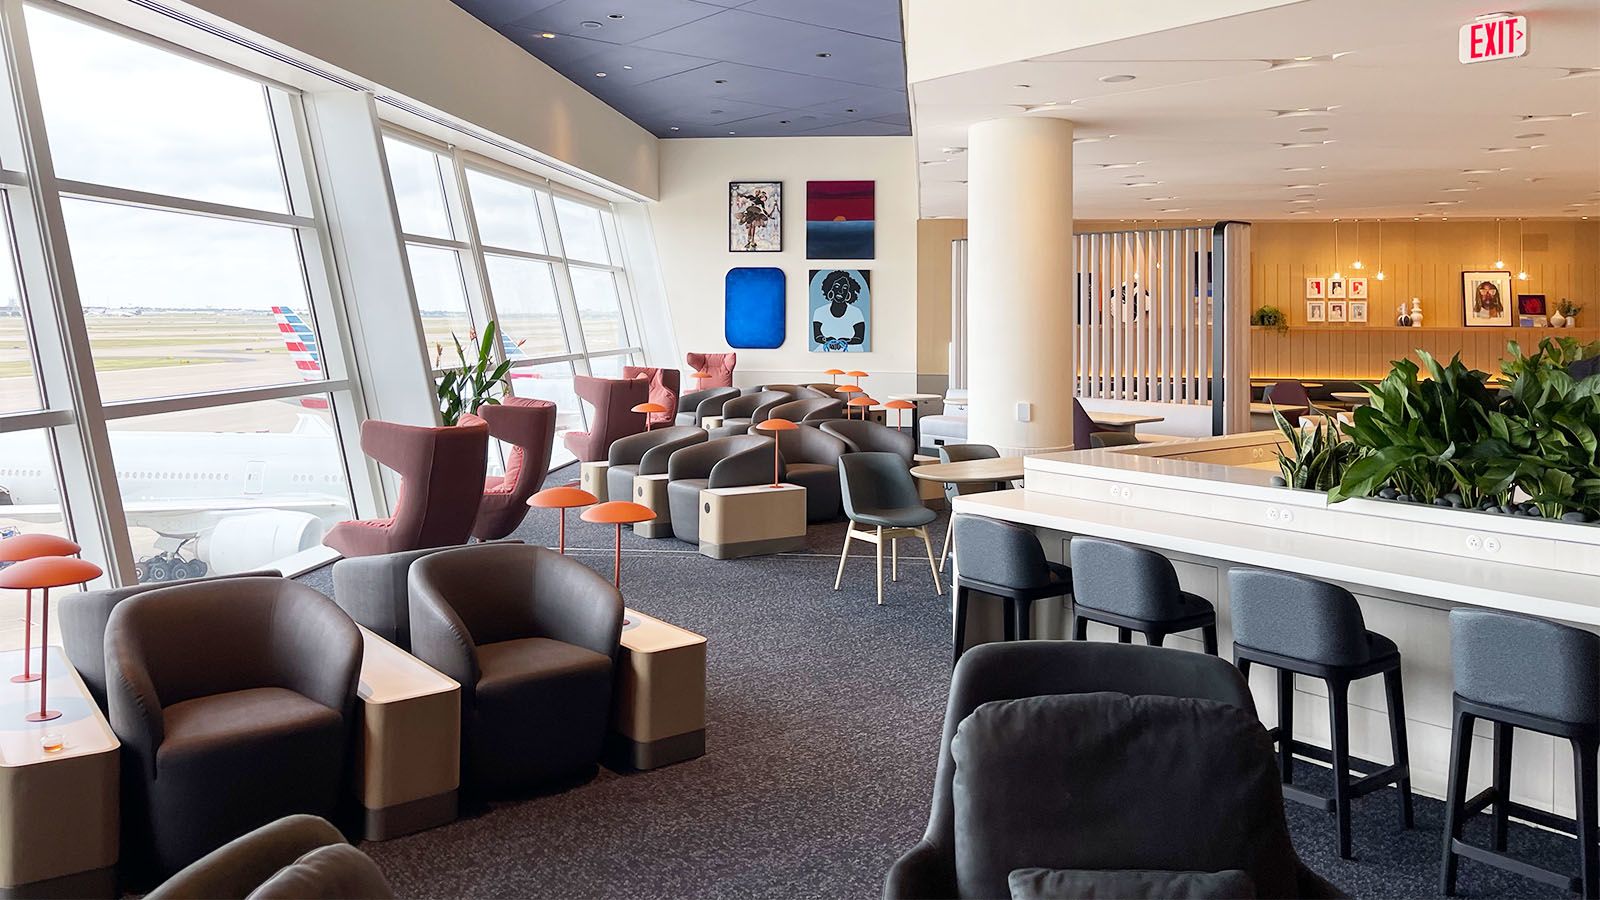 Capital One airport lounge opening at Dallas Forth Worth | CNN ...